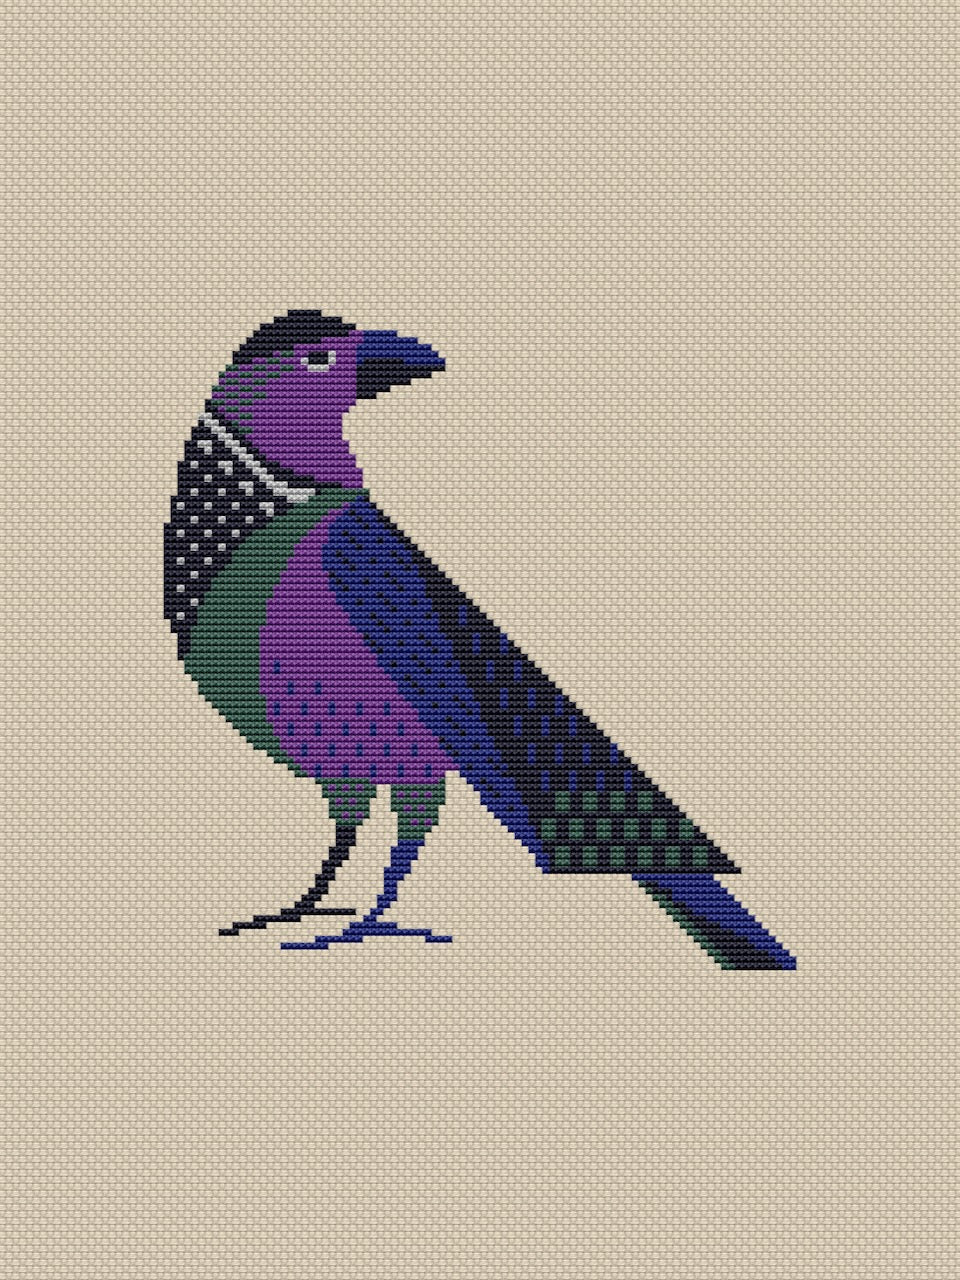 raven embroidery pattern